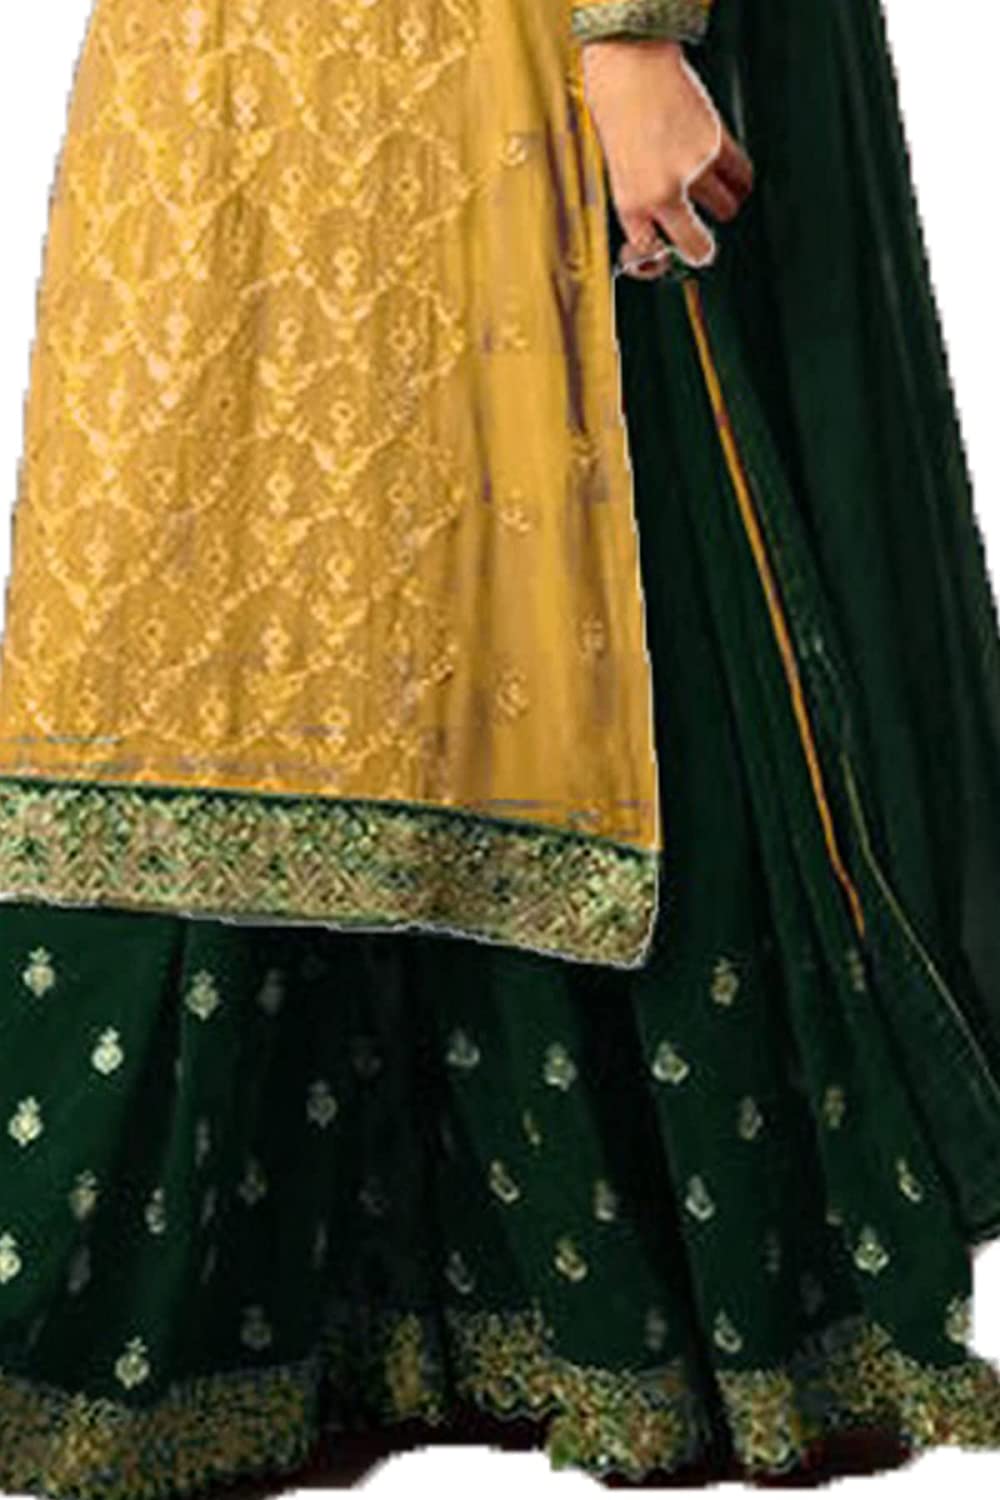 SHAFNUFAB® Women's Georgette Semi Stitched Anarkali Salwar Suit (Anarkali-Gown-Salwar-Suit-SF-7ver Yellow Free Size) -  salwar suits in Sri Lanka from Arcade Online Shopping - Just Rs. 8299!